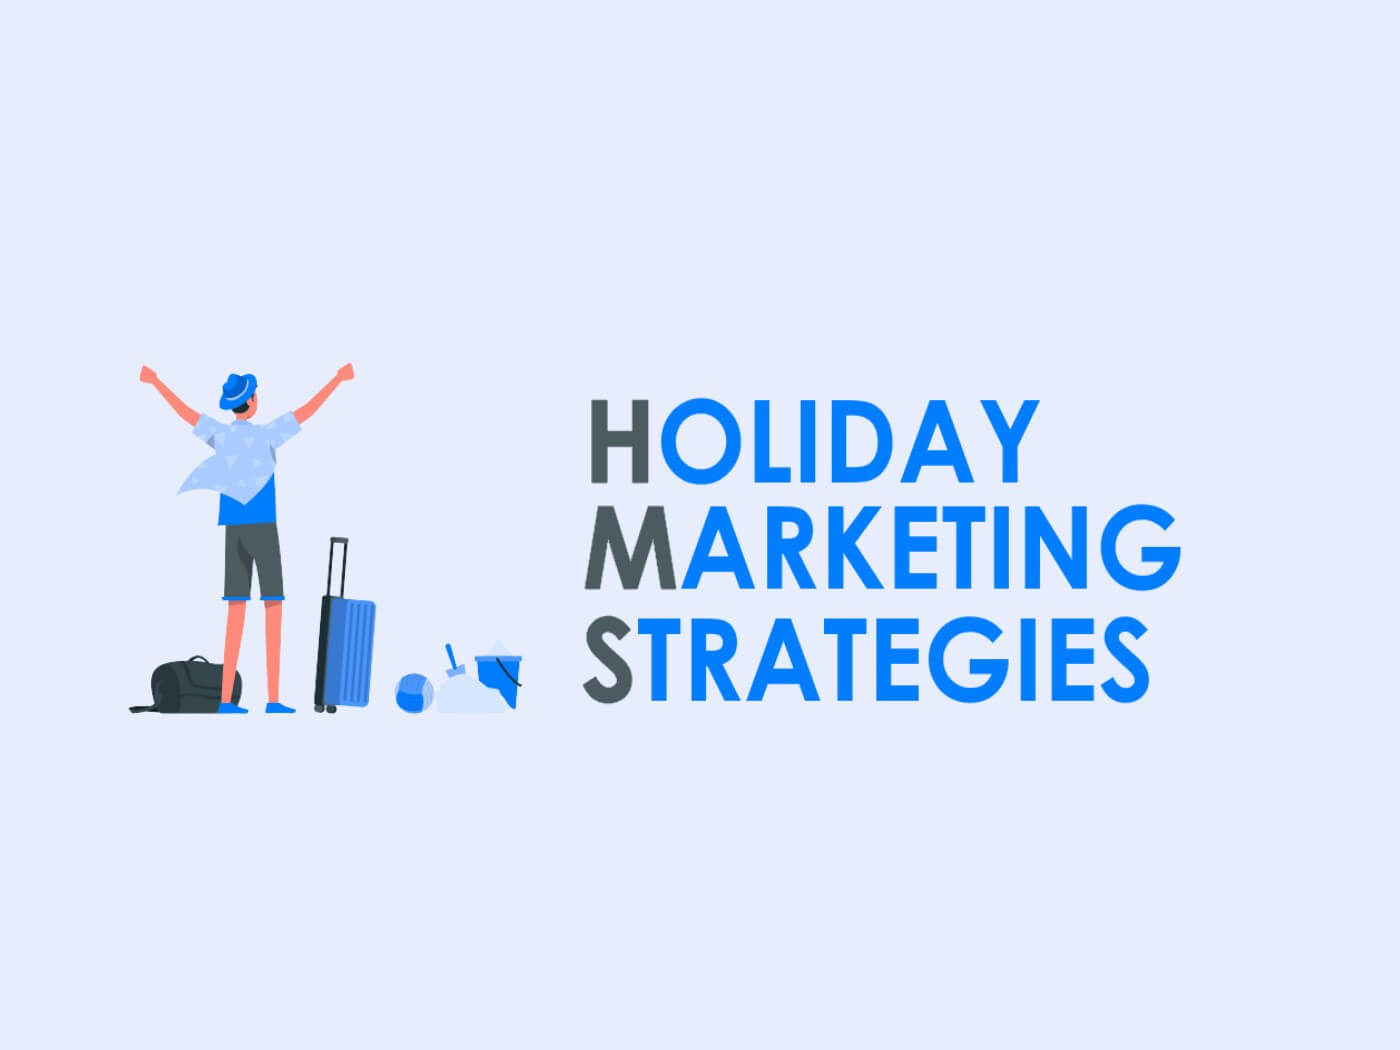 11 Awesome Holiday Marketing Strategies You Should Adopt